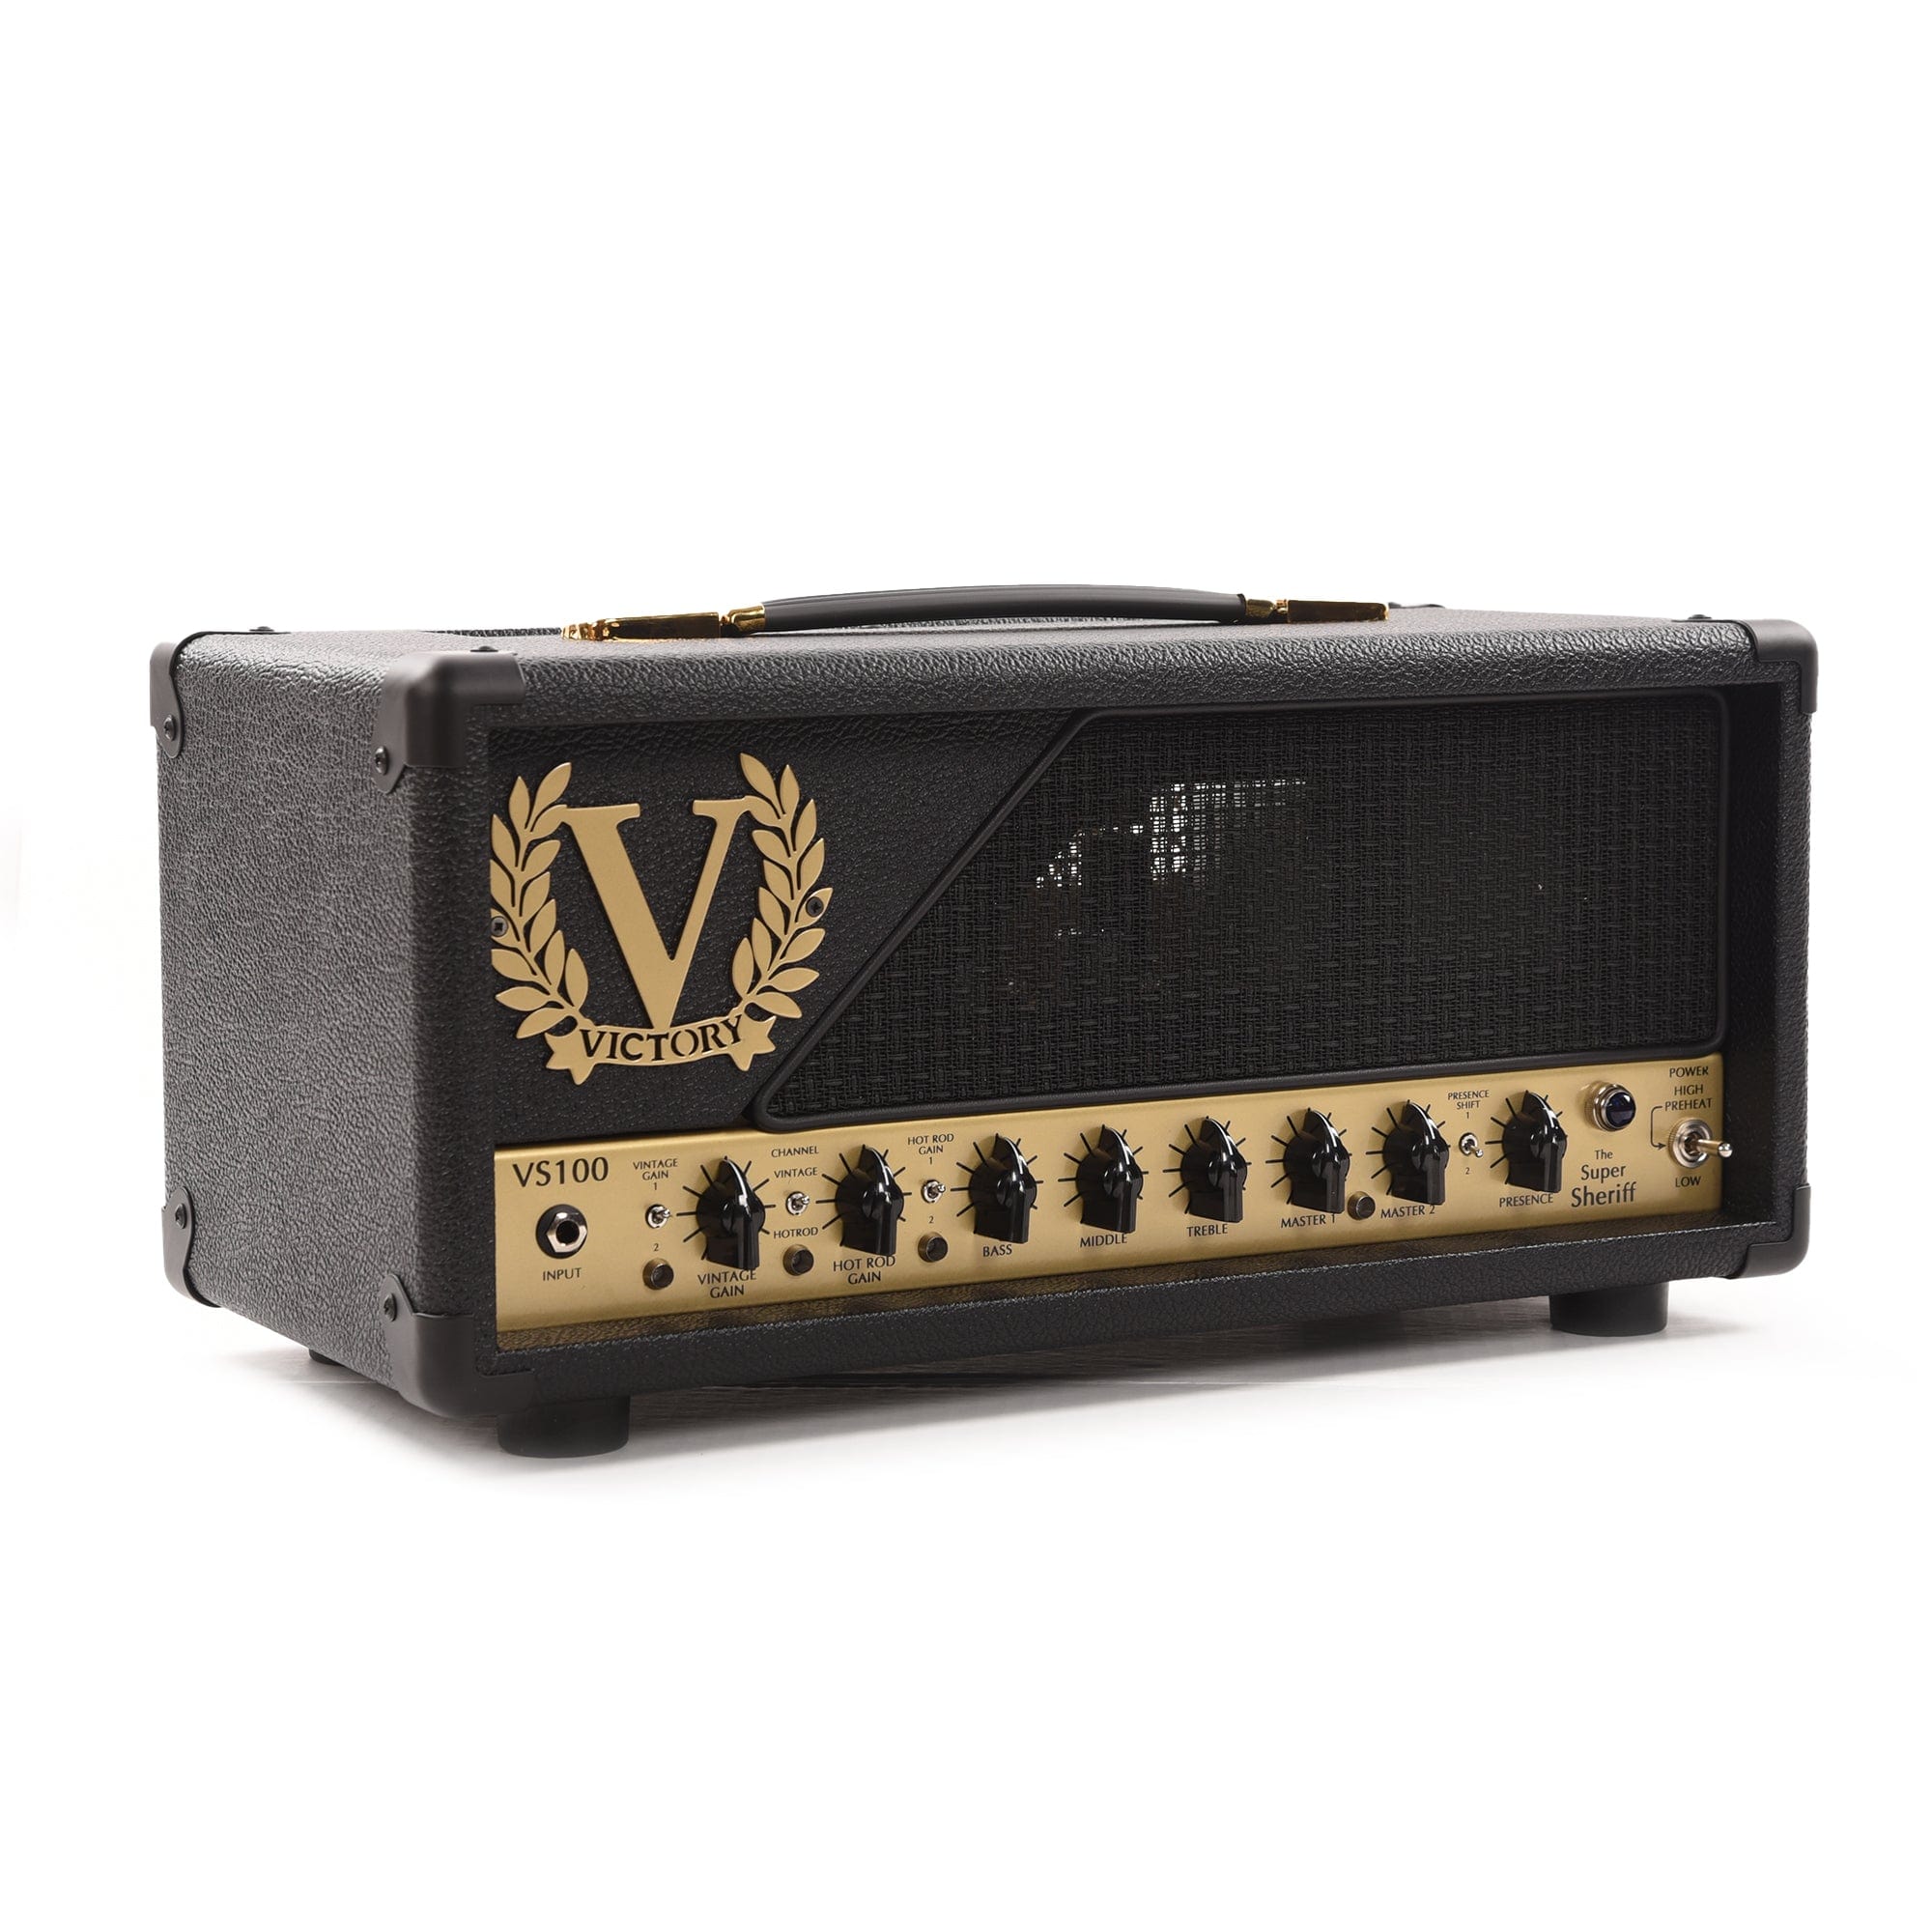 Victory Sheriff 100 Compact Head Amps / Guitar Heads